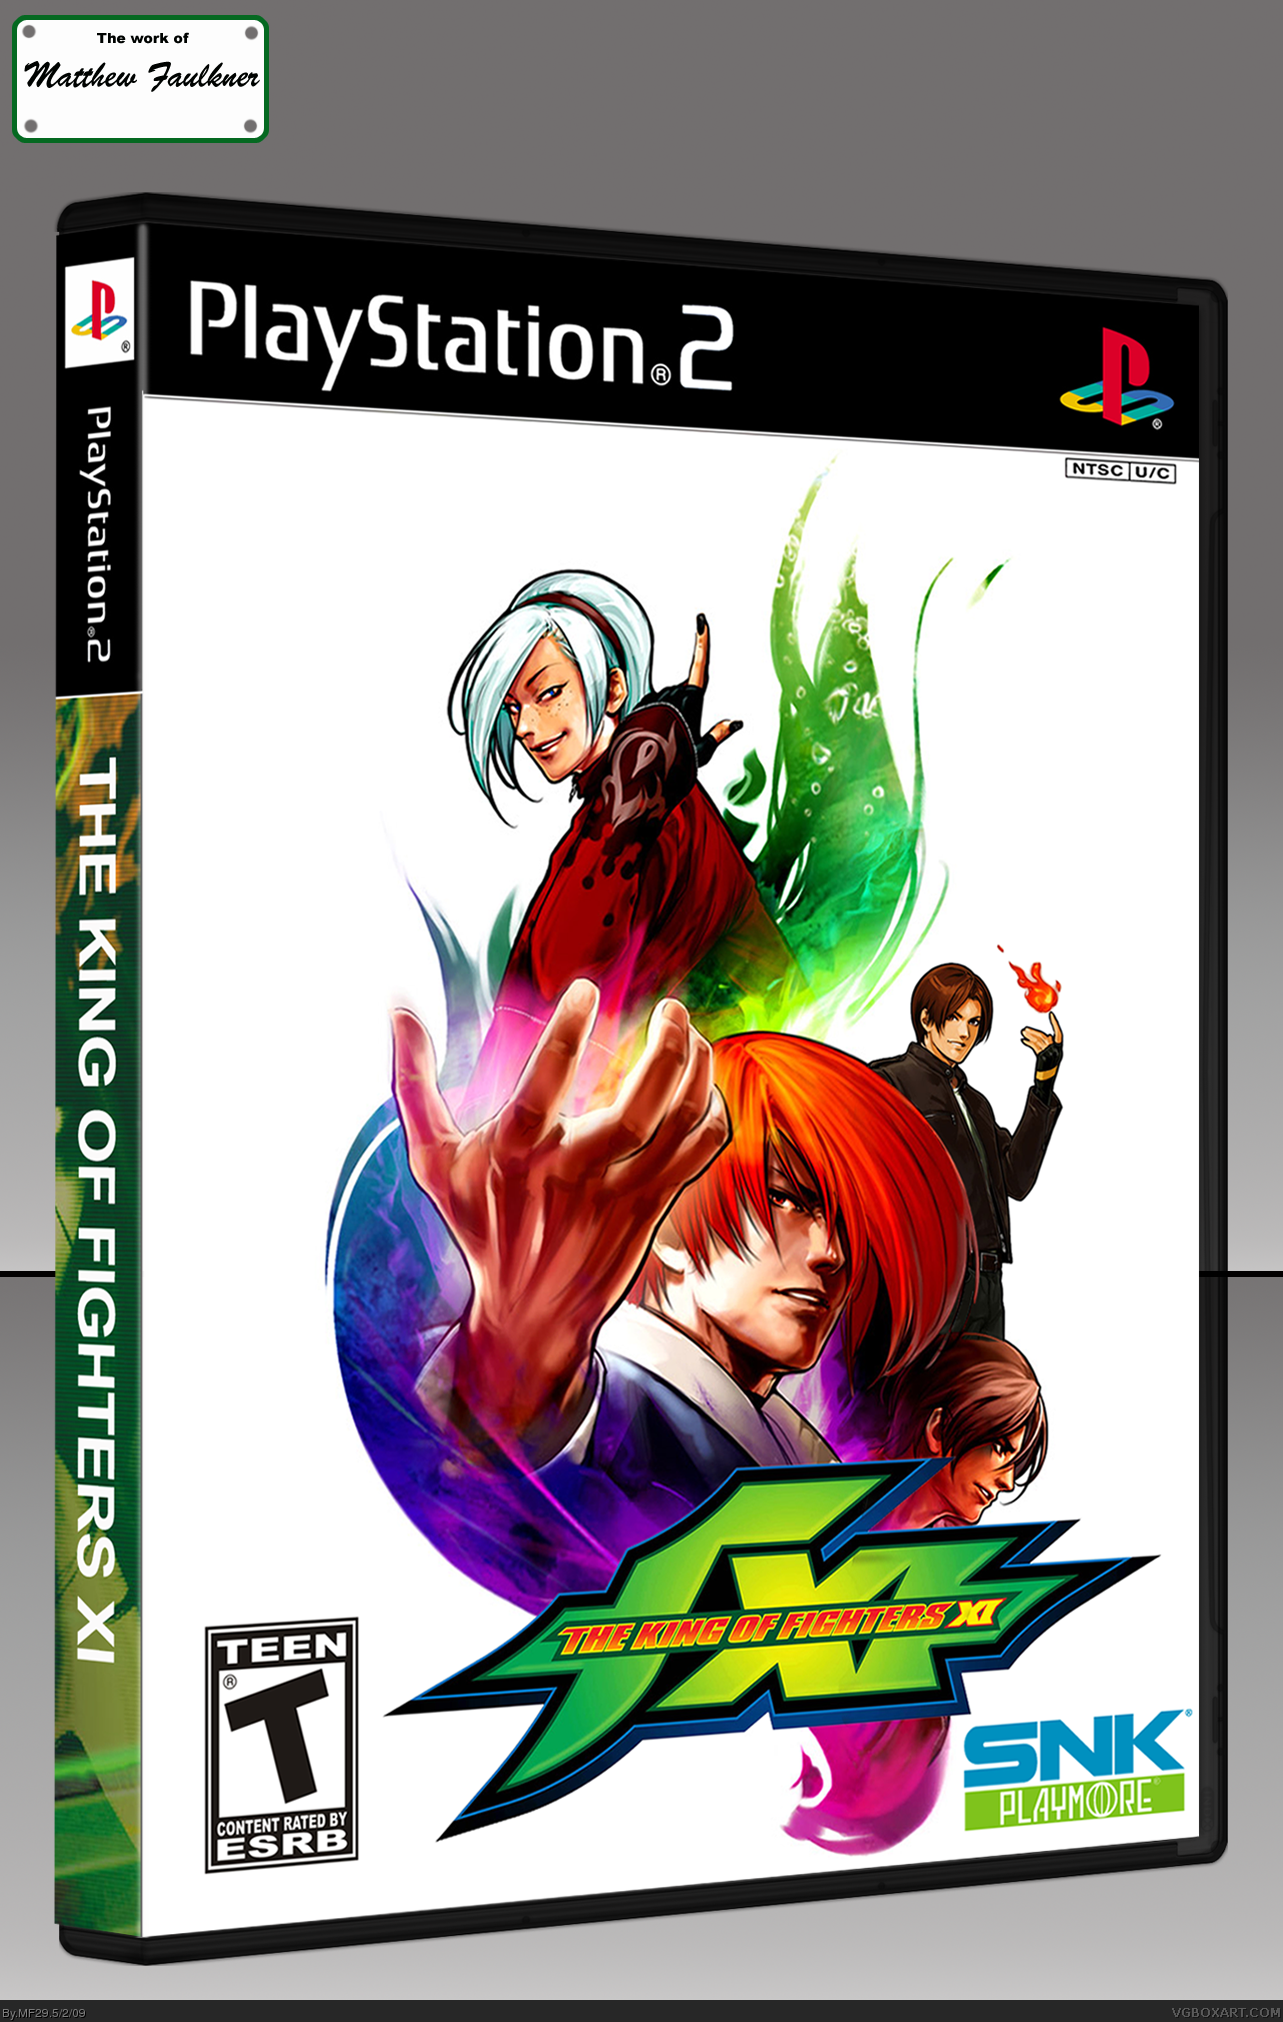 The King of Fighters XI box cover